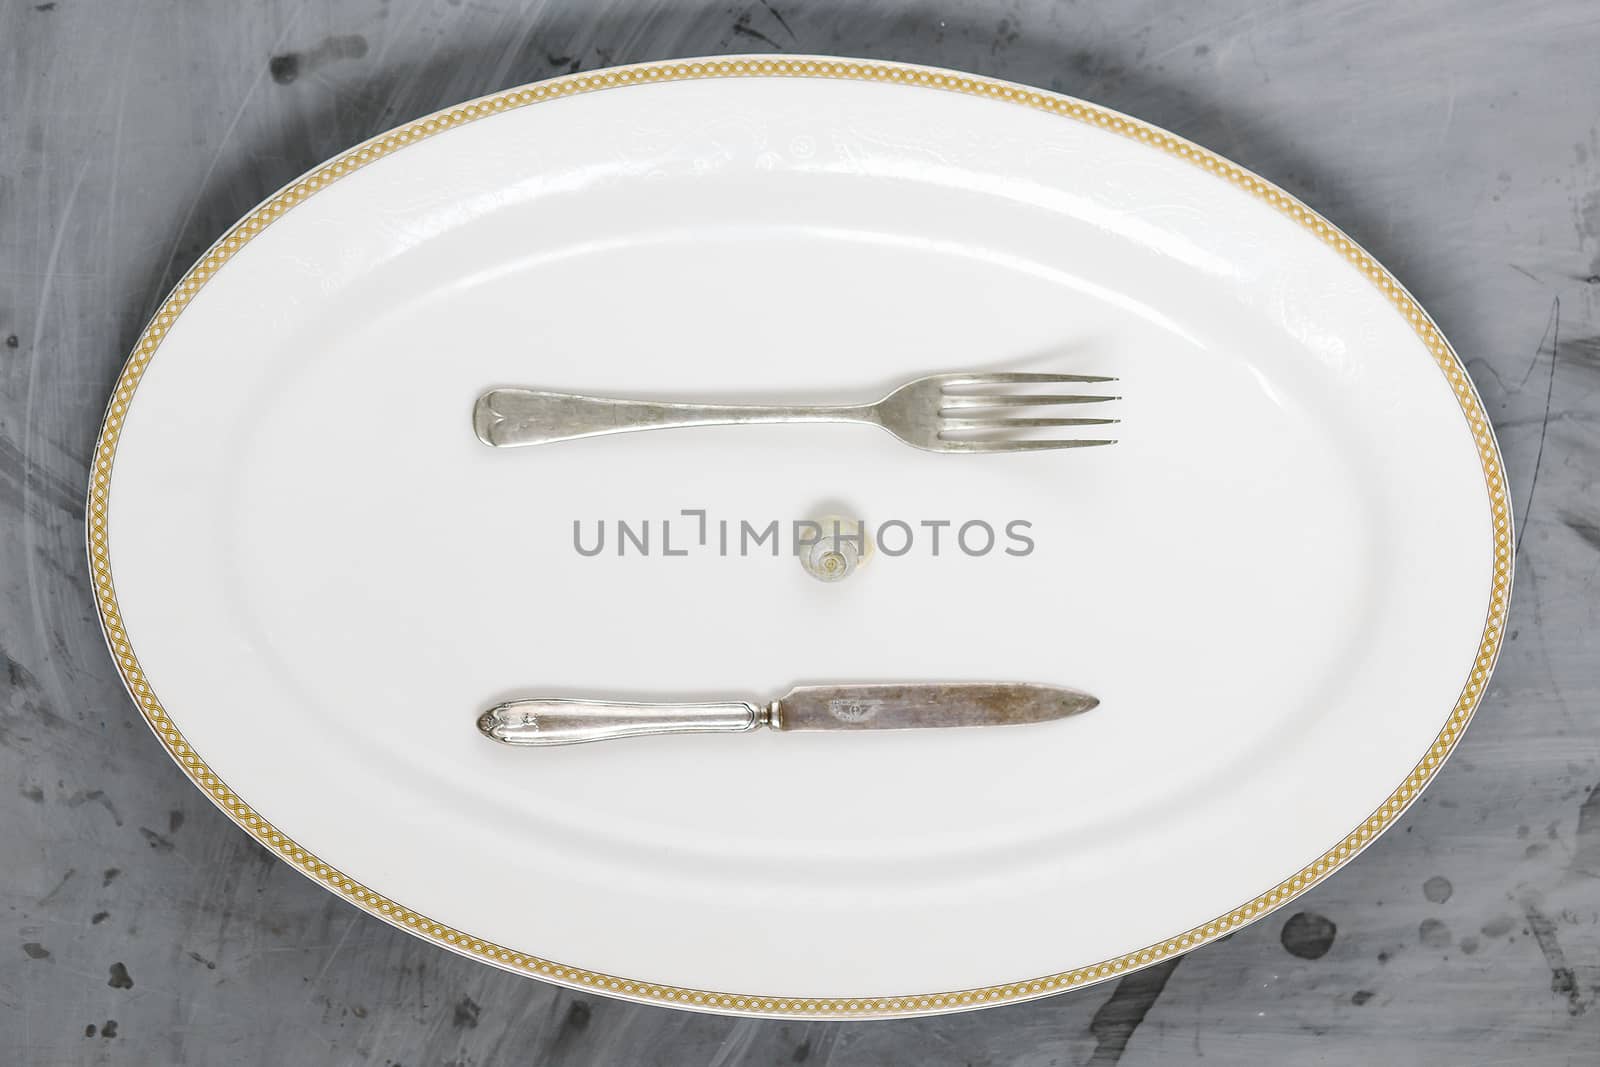 Snail, Fork and Knife on White Plate on Grey Concrete Background. Copy space.